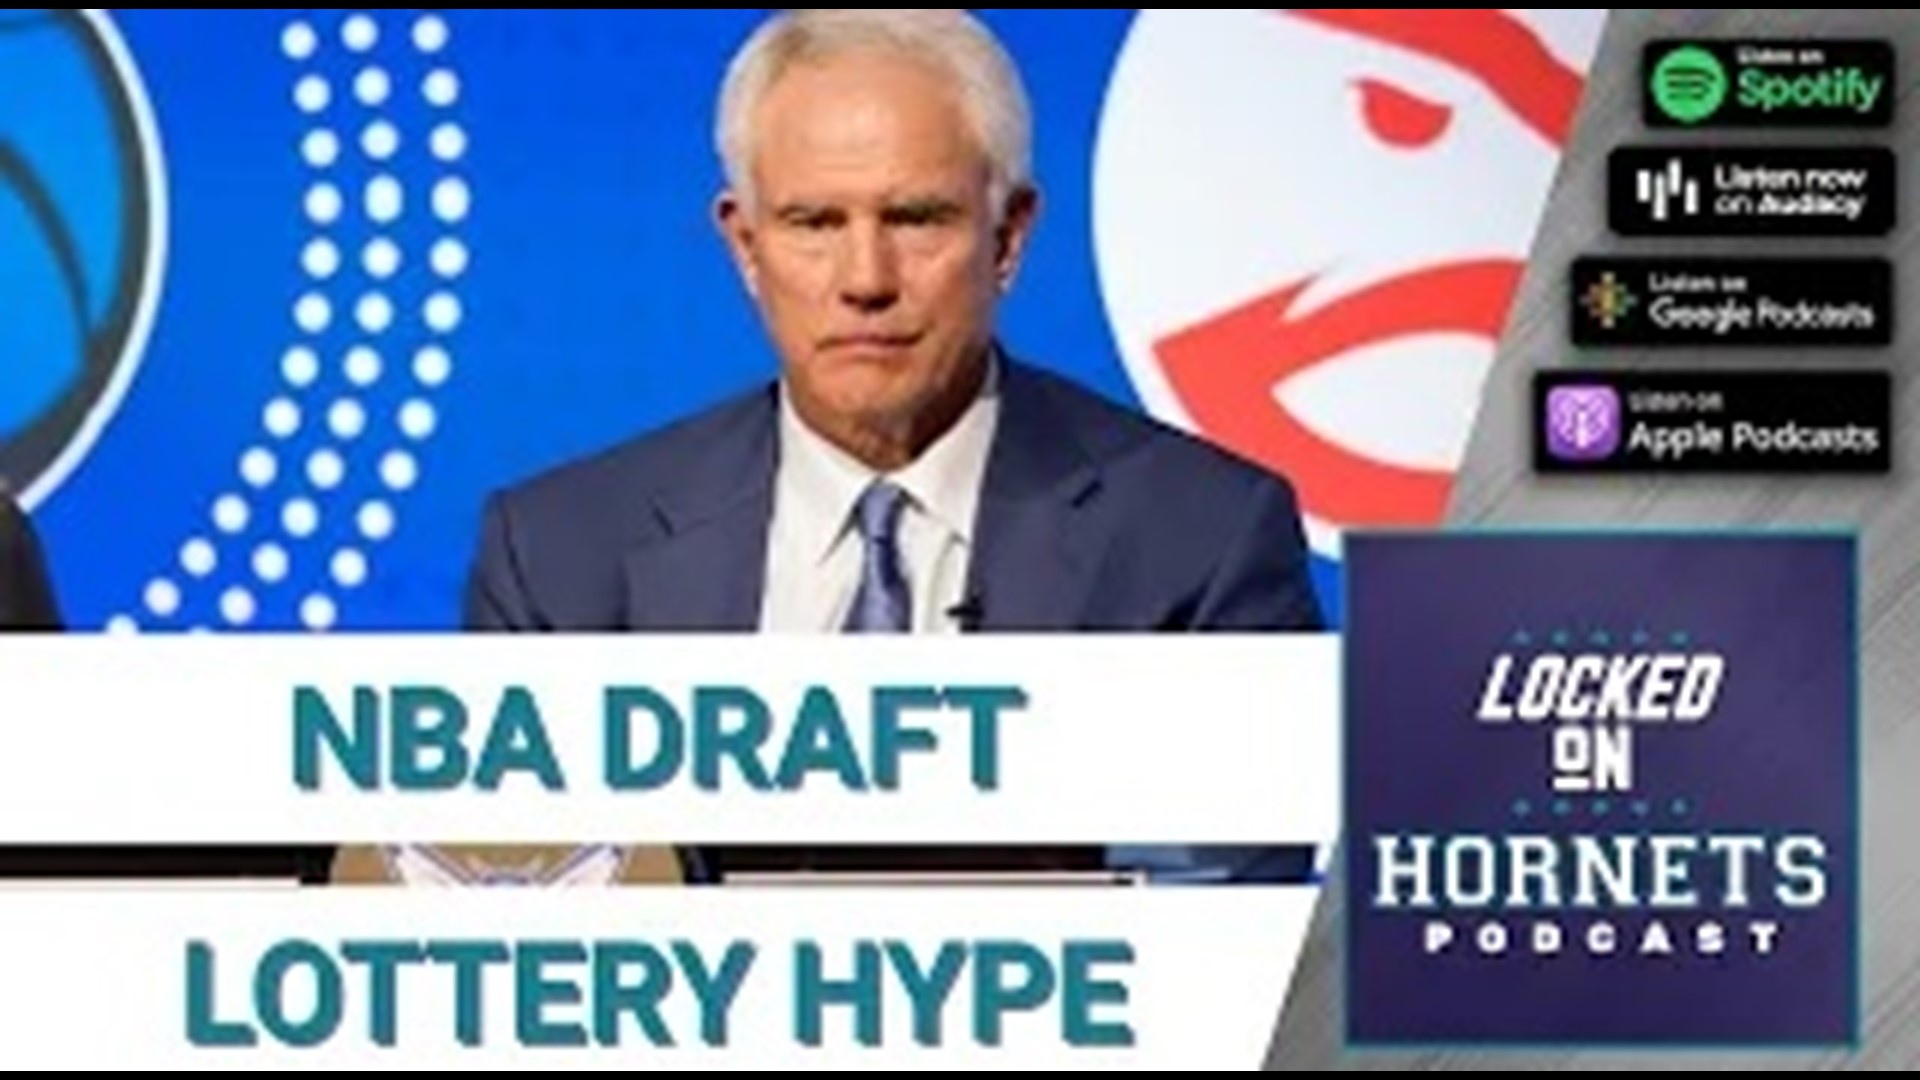 We update you on a head coaching search that seems to be inching towards the finish line. Plus, we start previewing the draft odds and scenarios for the Hornets.